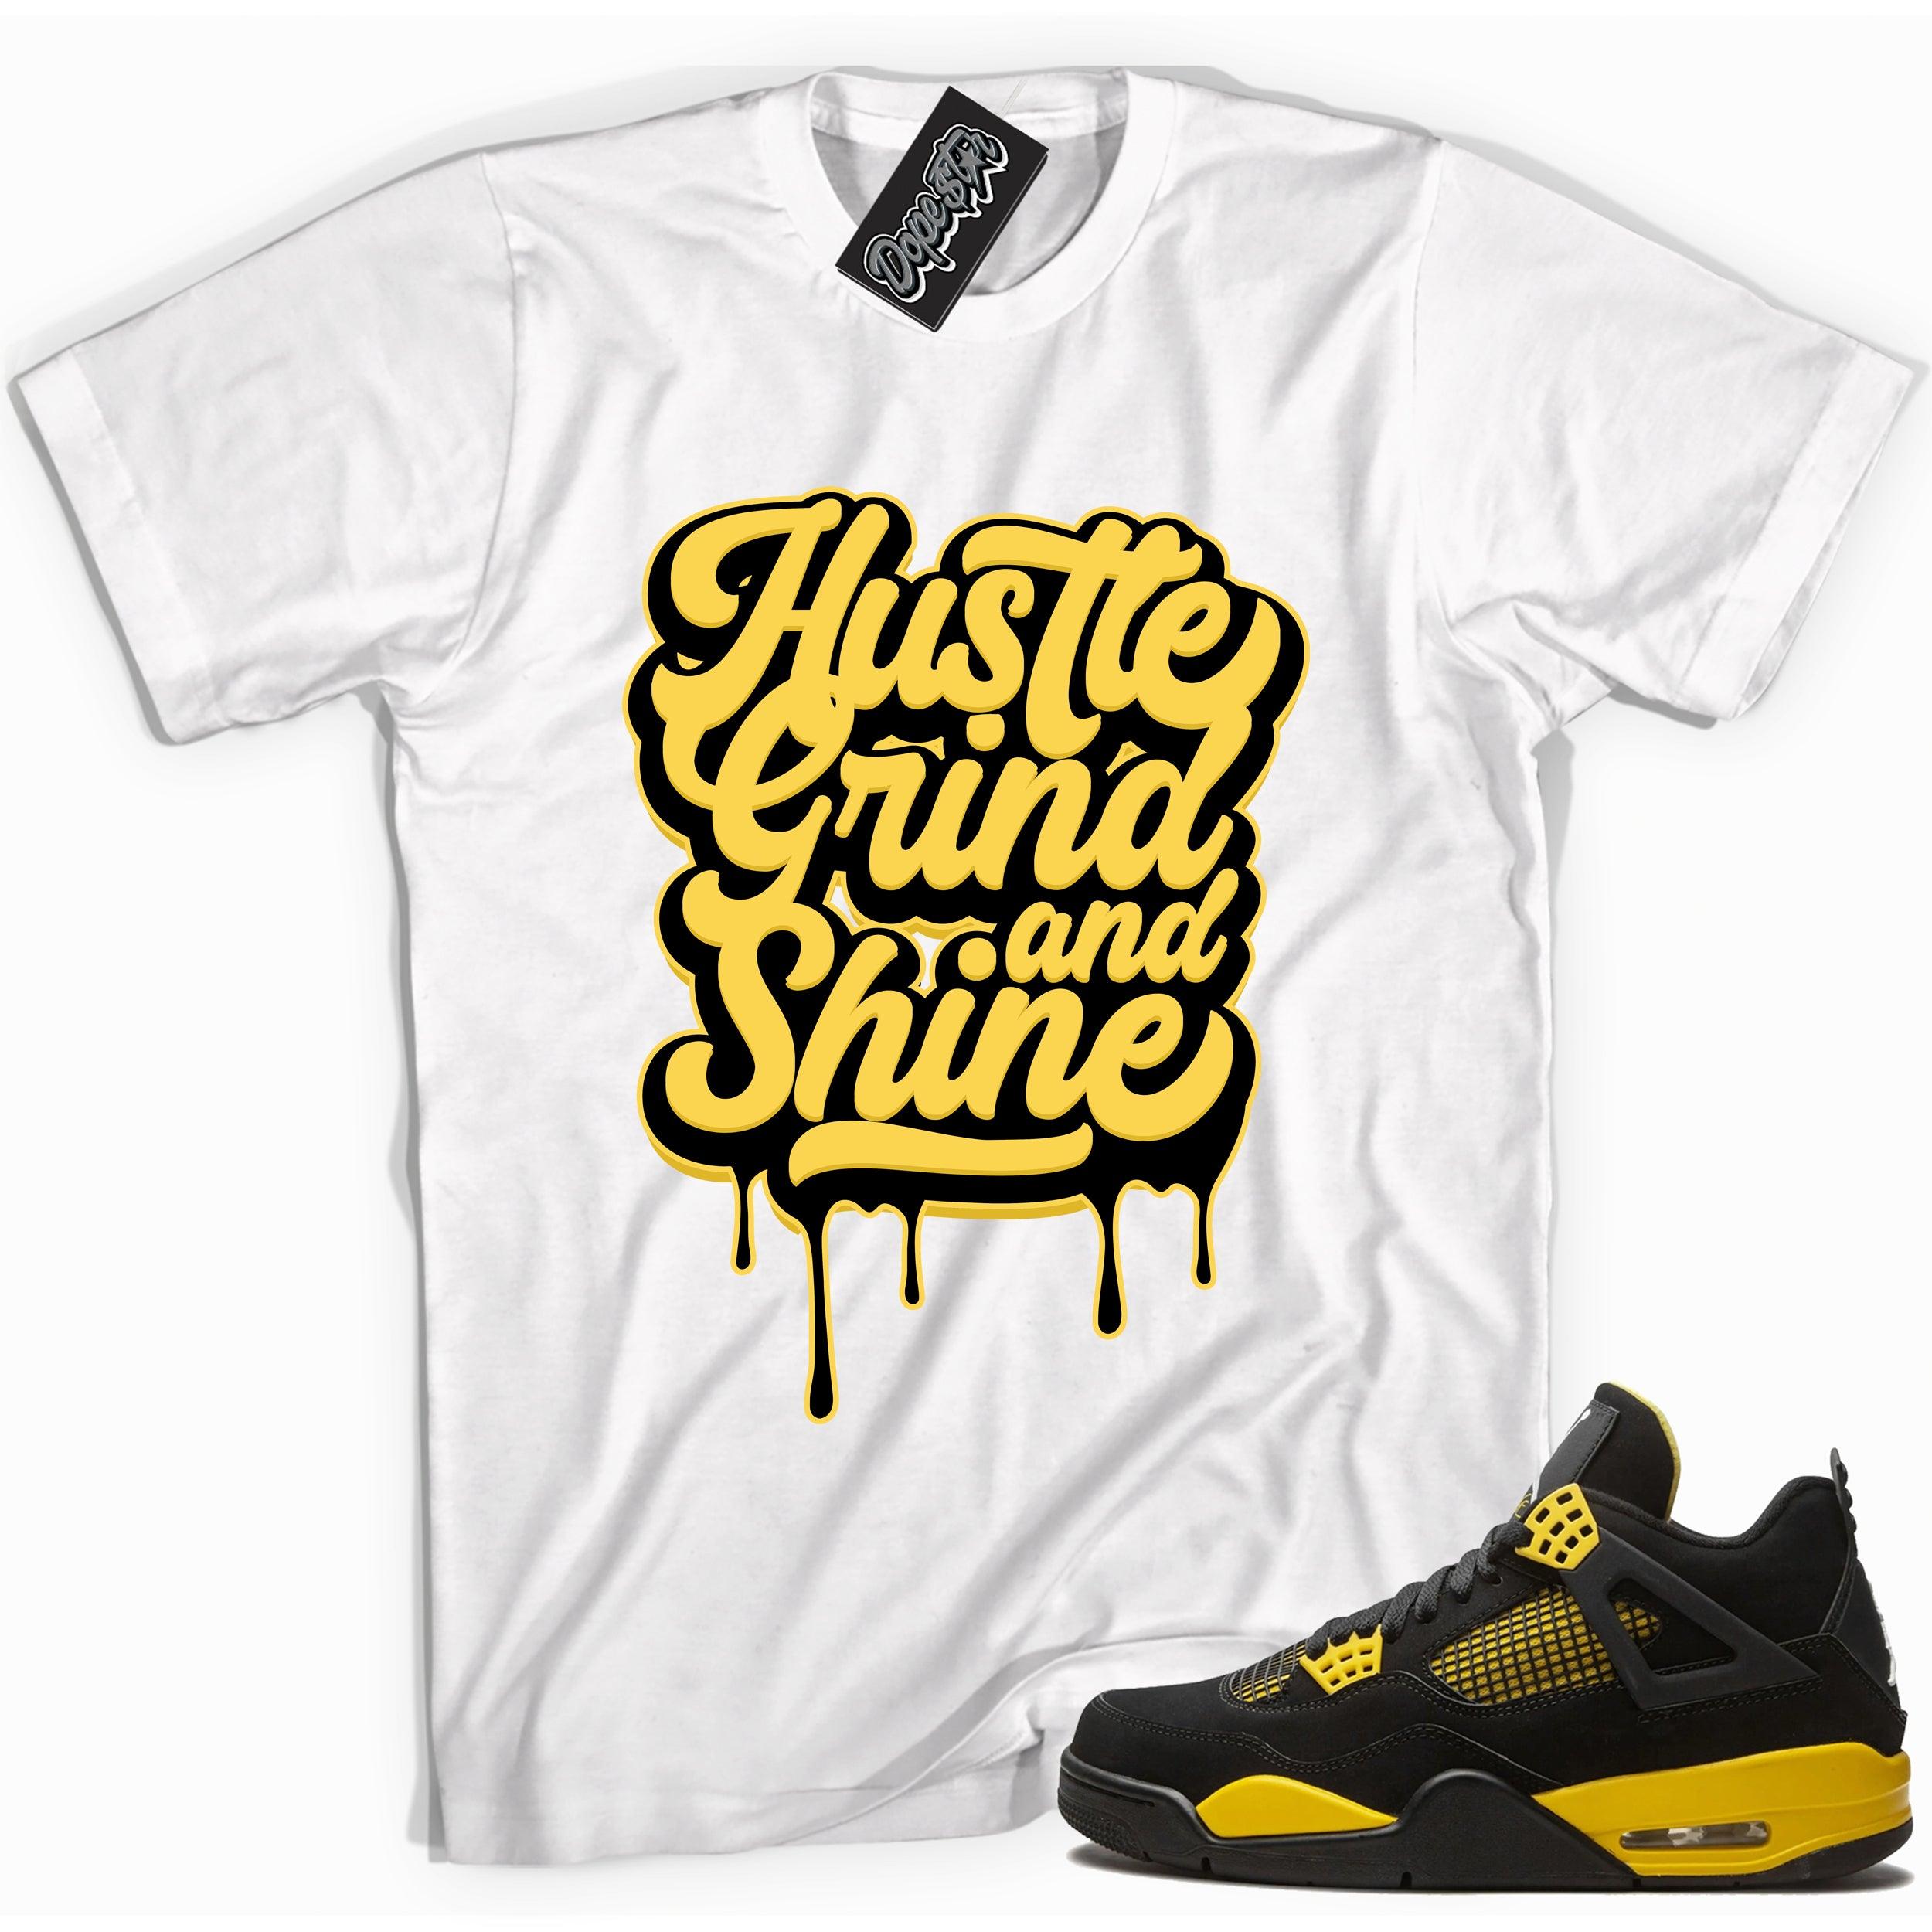 Cool white graphic tee with 'hustle grind & shine' print, that perfectly matches Air Jordan 4 Thunder sneakers